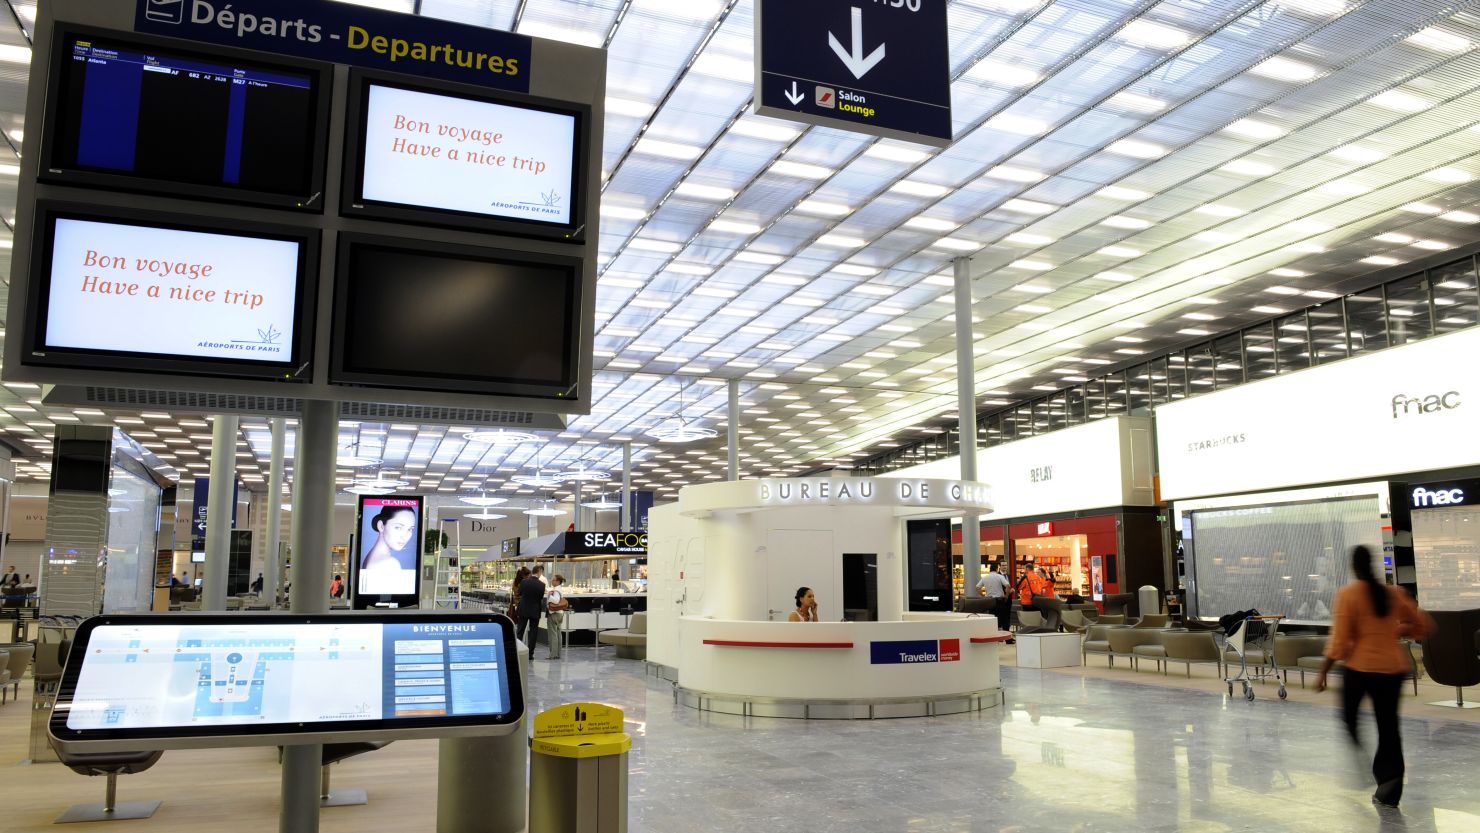 The cash was stolen from Charles de Gaulle airport on Friday.